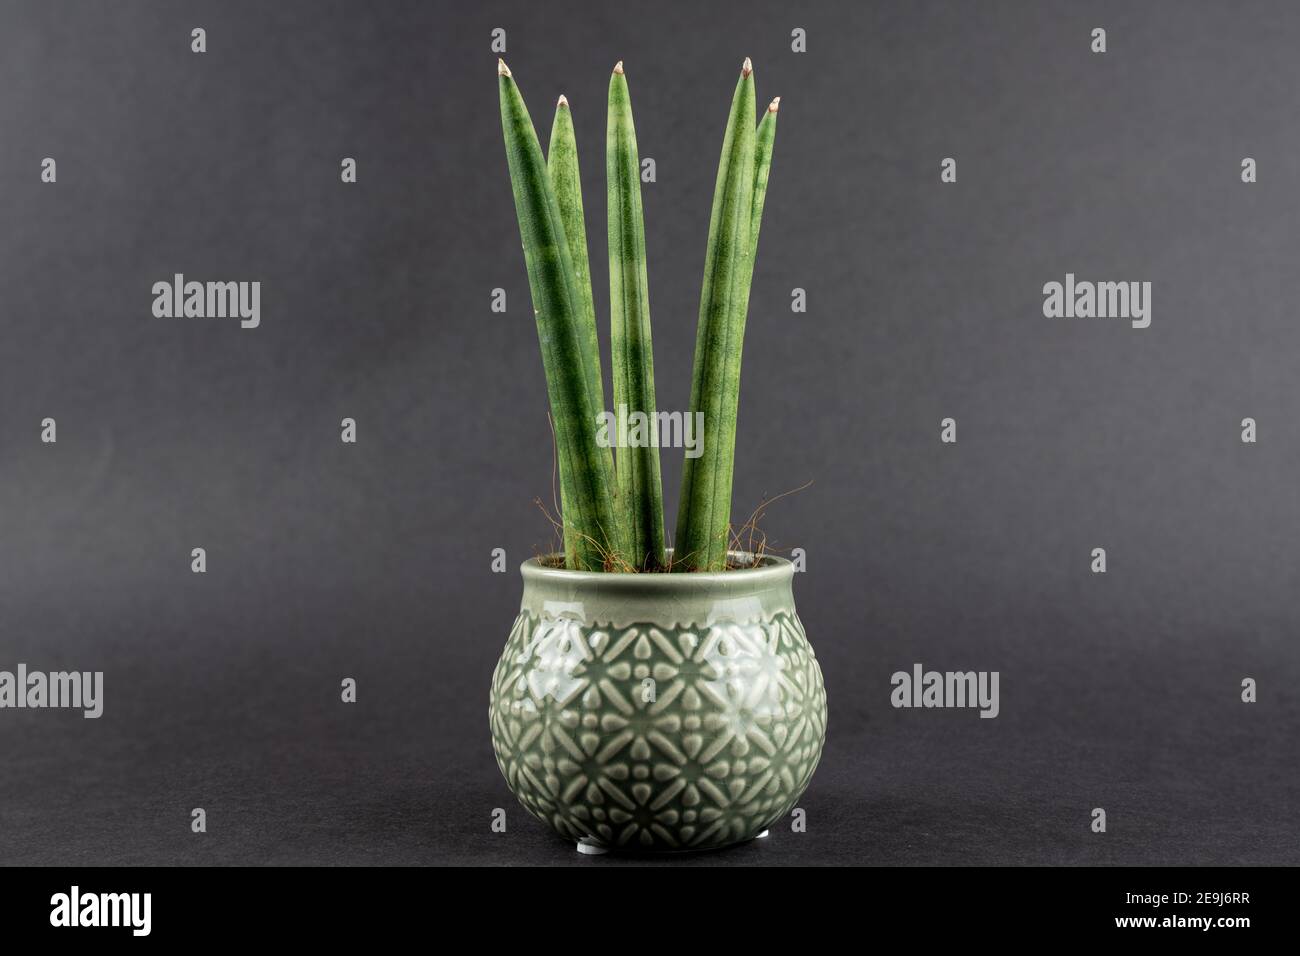 sansevieria cylindrica in pot with black background, top view Stock Photo